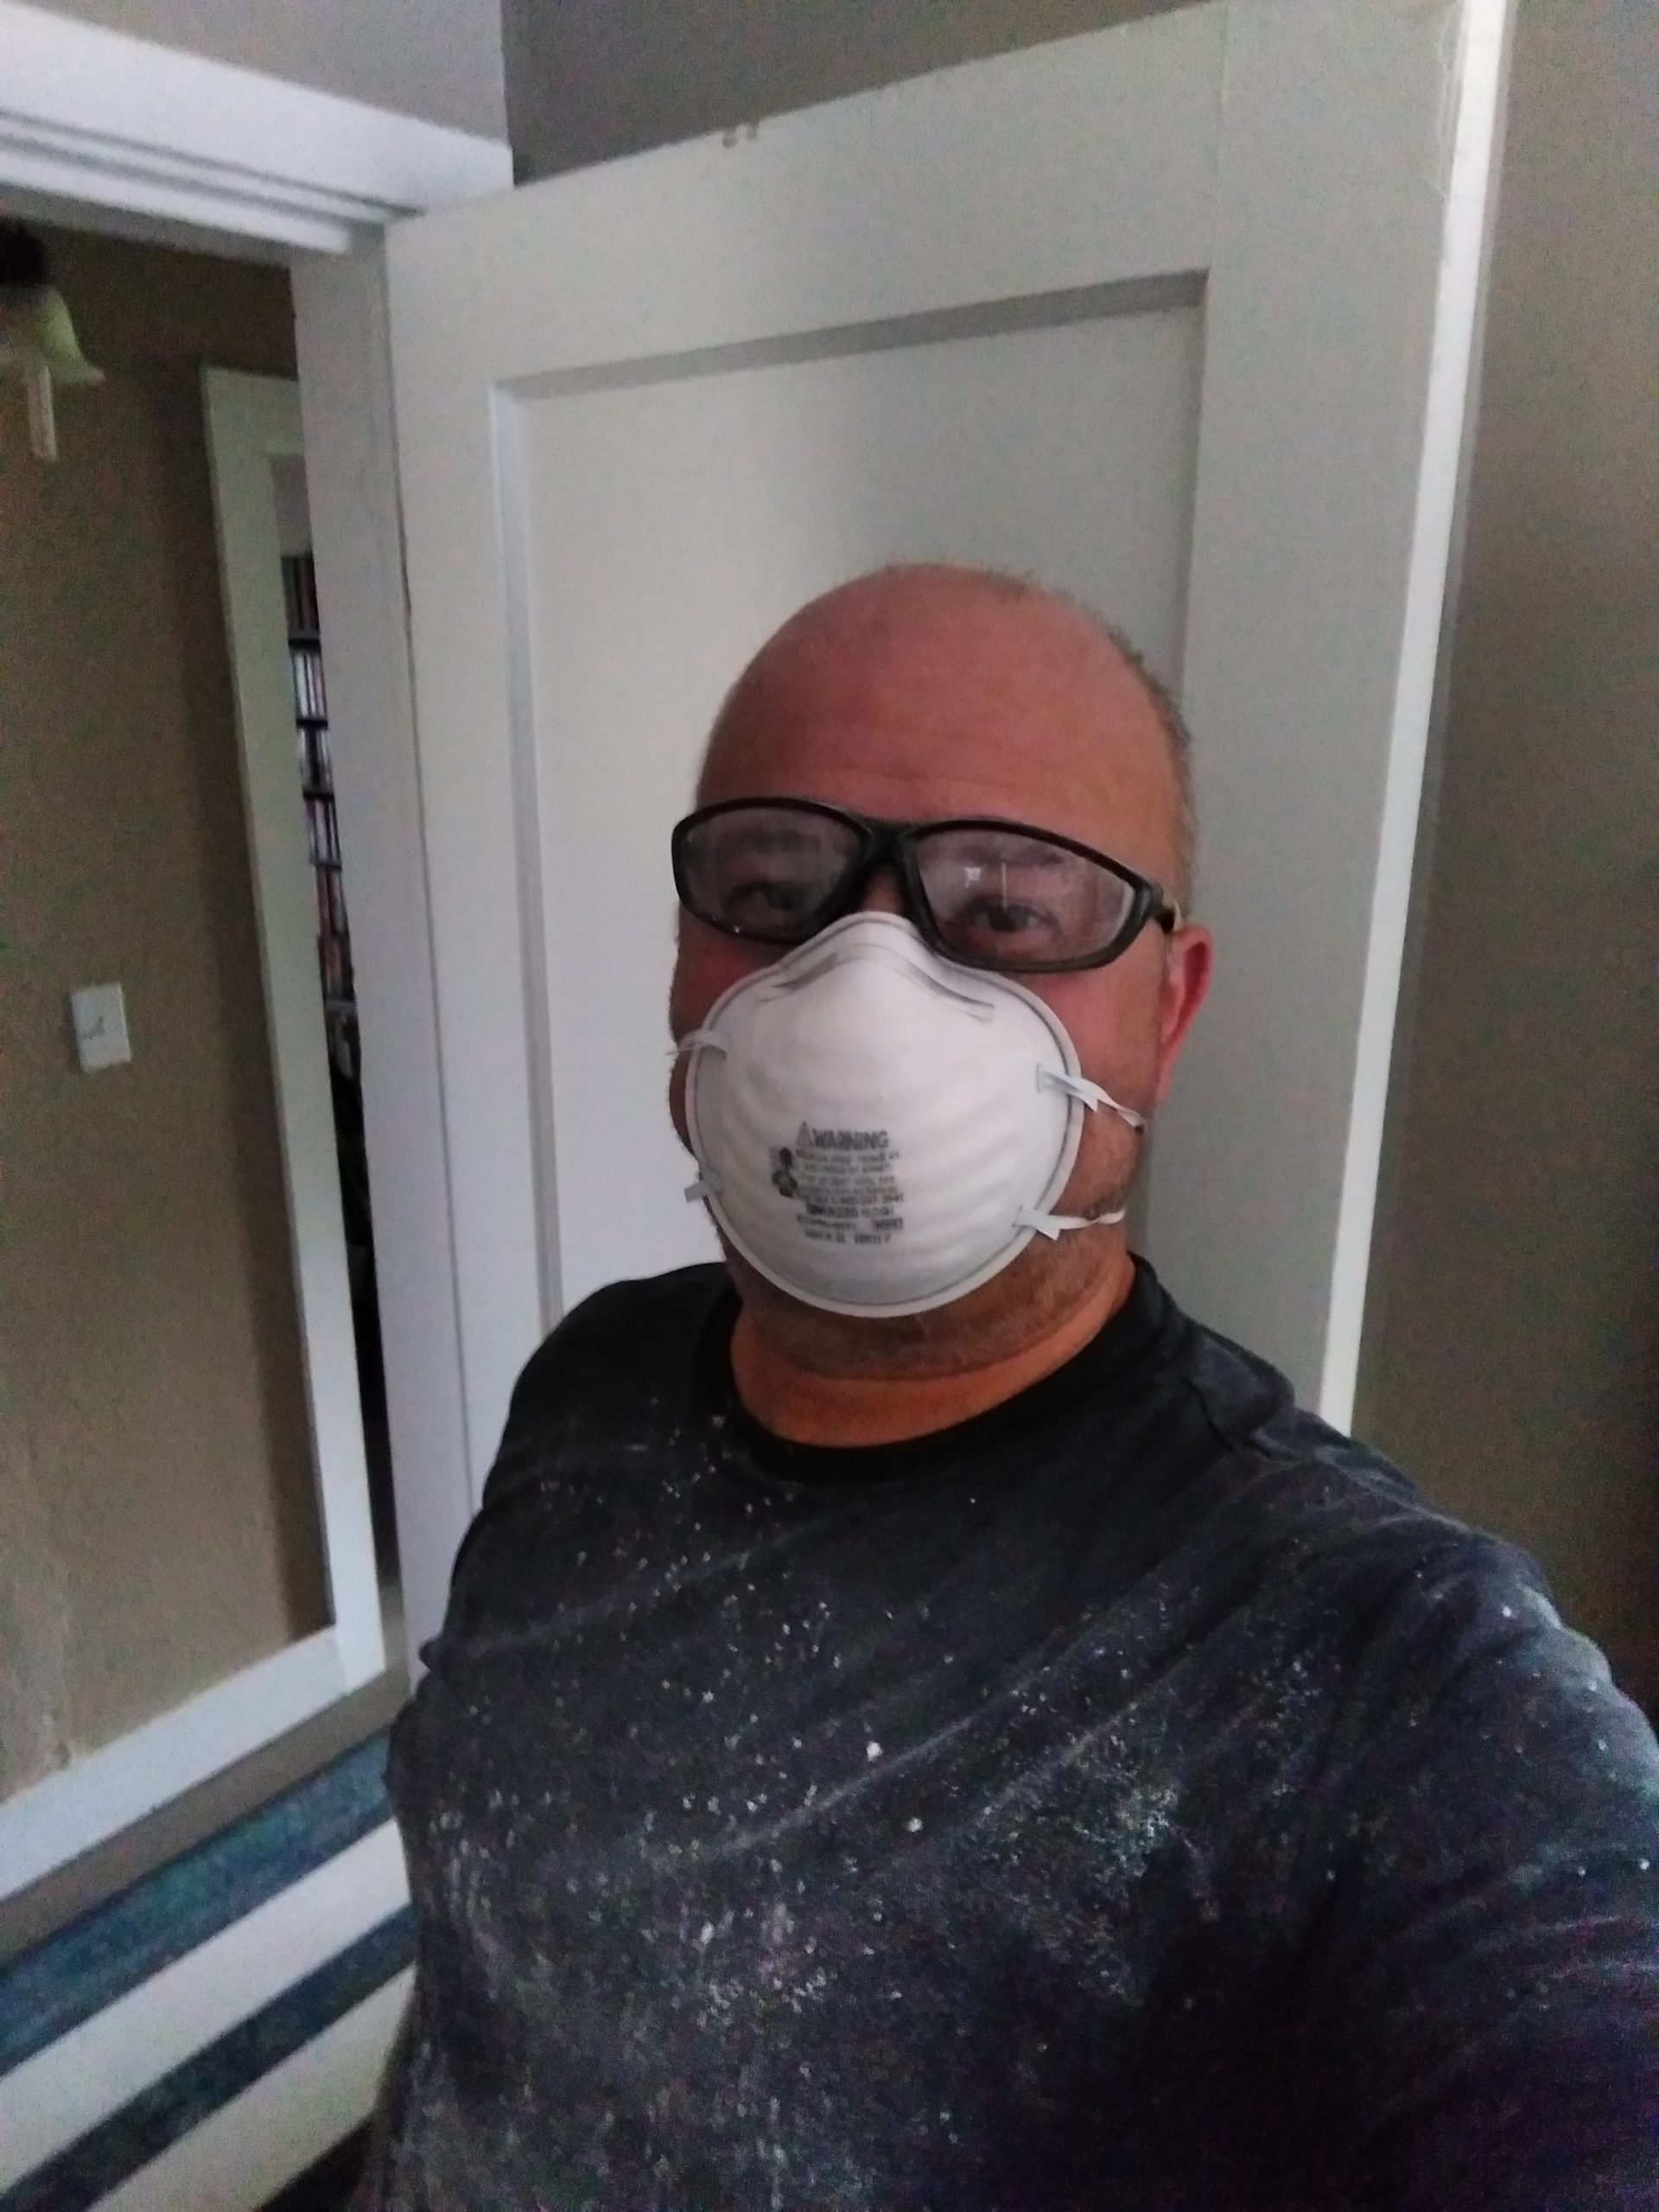 I'm wearing a dark shirt covered in plaster dust, an N95 face mask, and safety glasses. In the backgrounds is an open wodden door and the beige painted walls of the hallway..